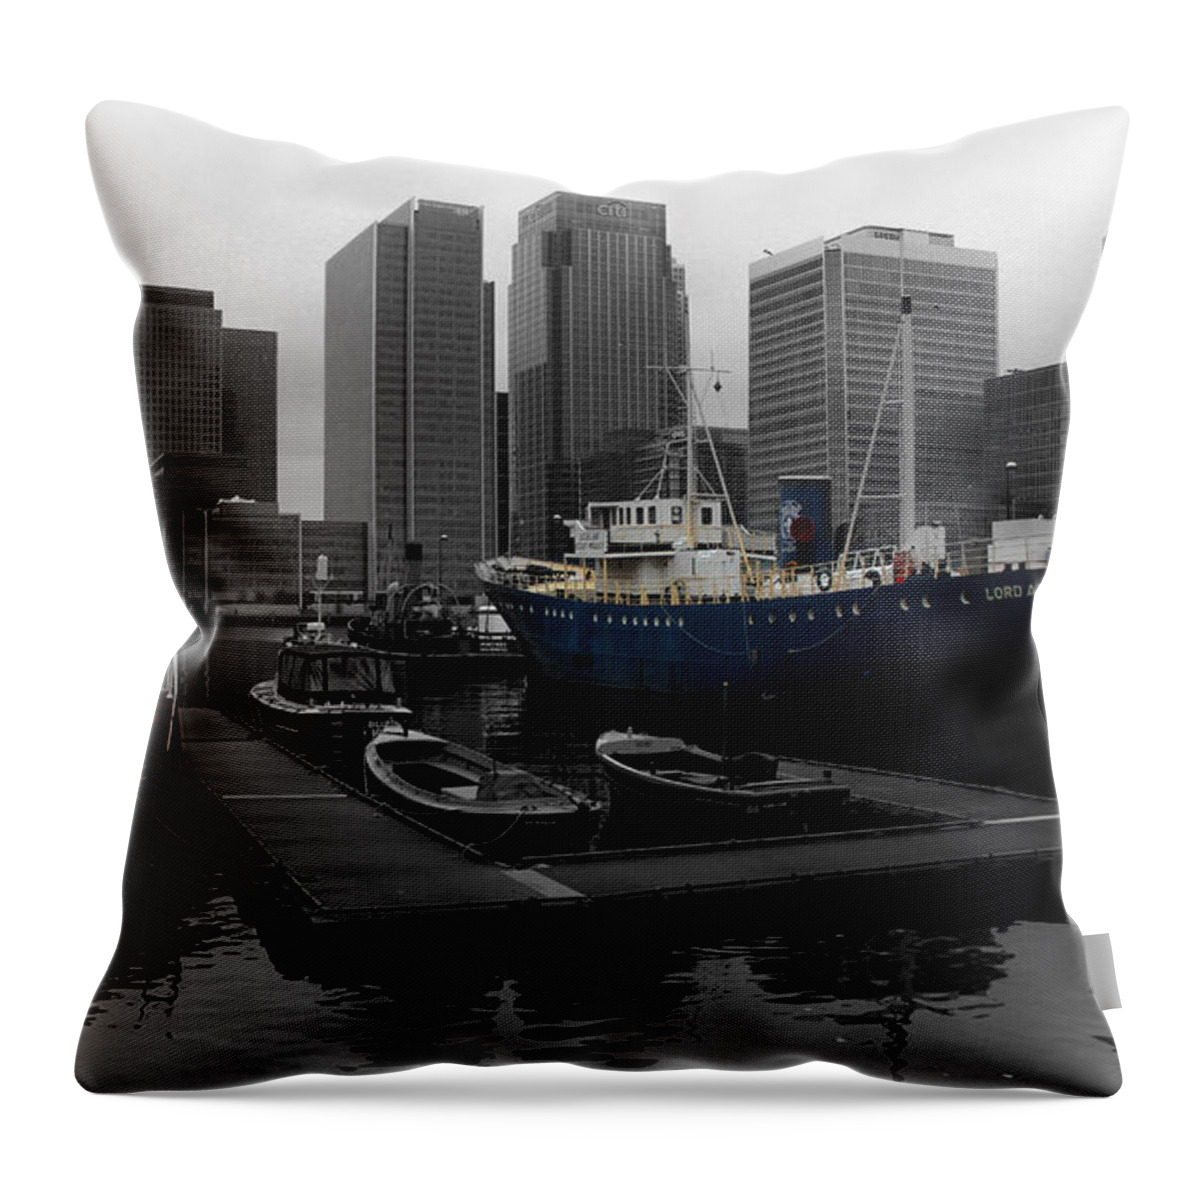 London Throw Pillow featuring the photograph London's Docklands by Martin Newman